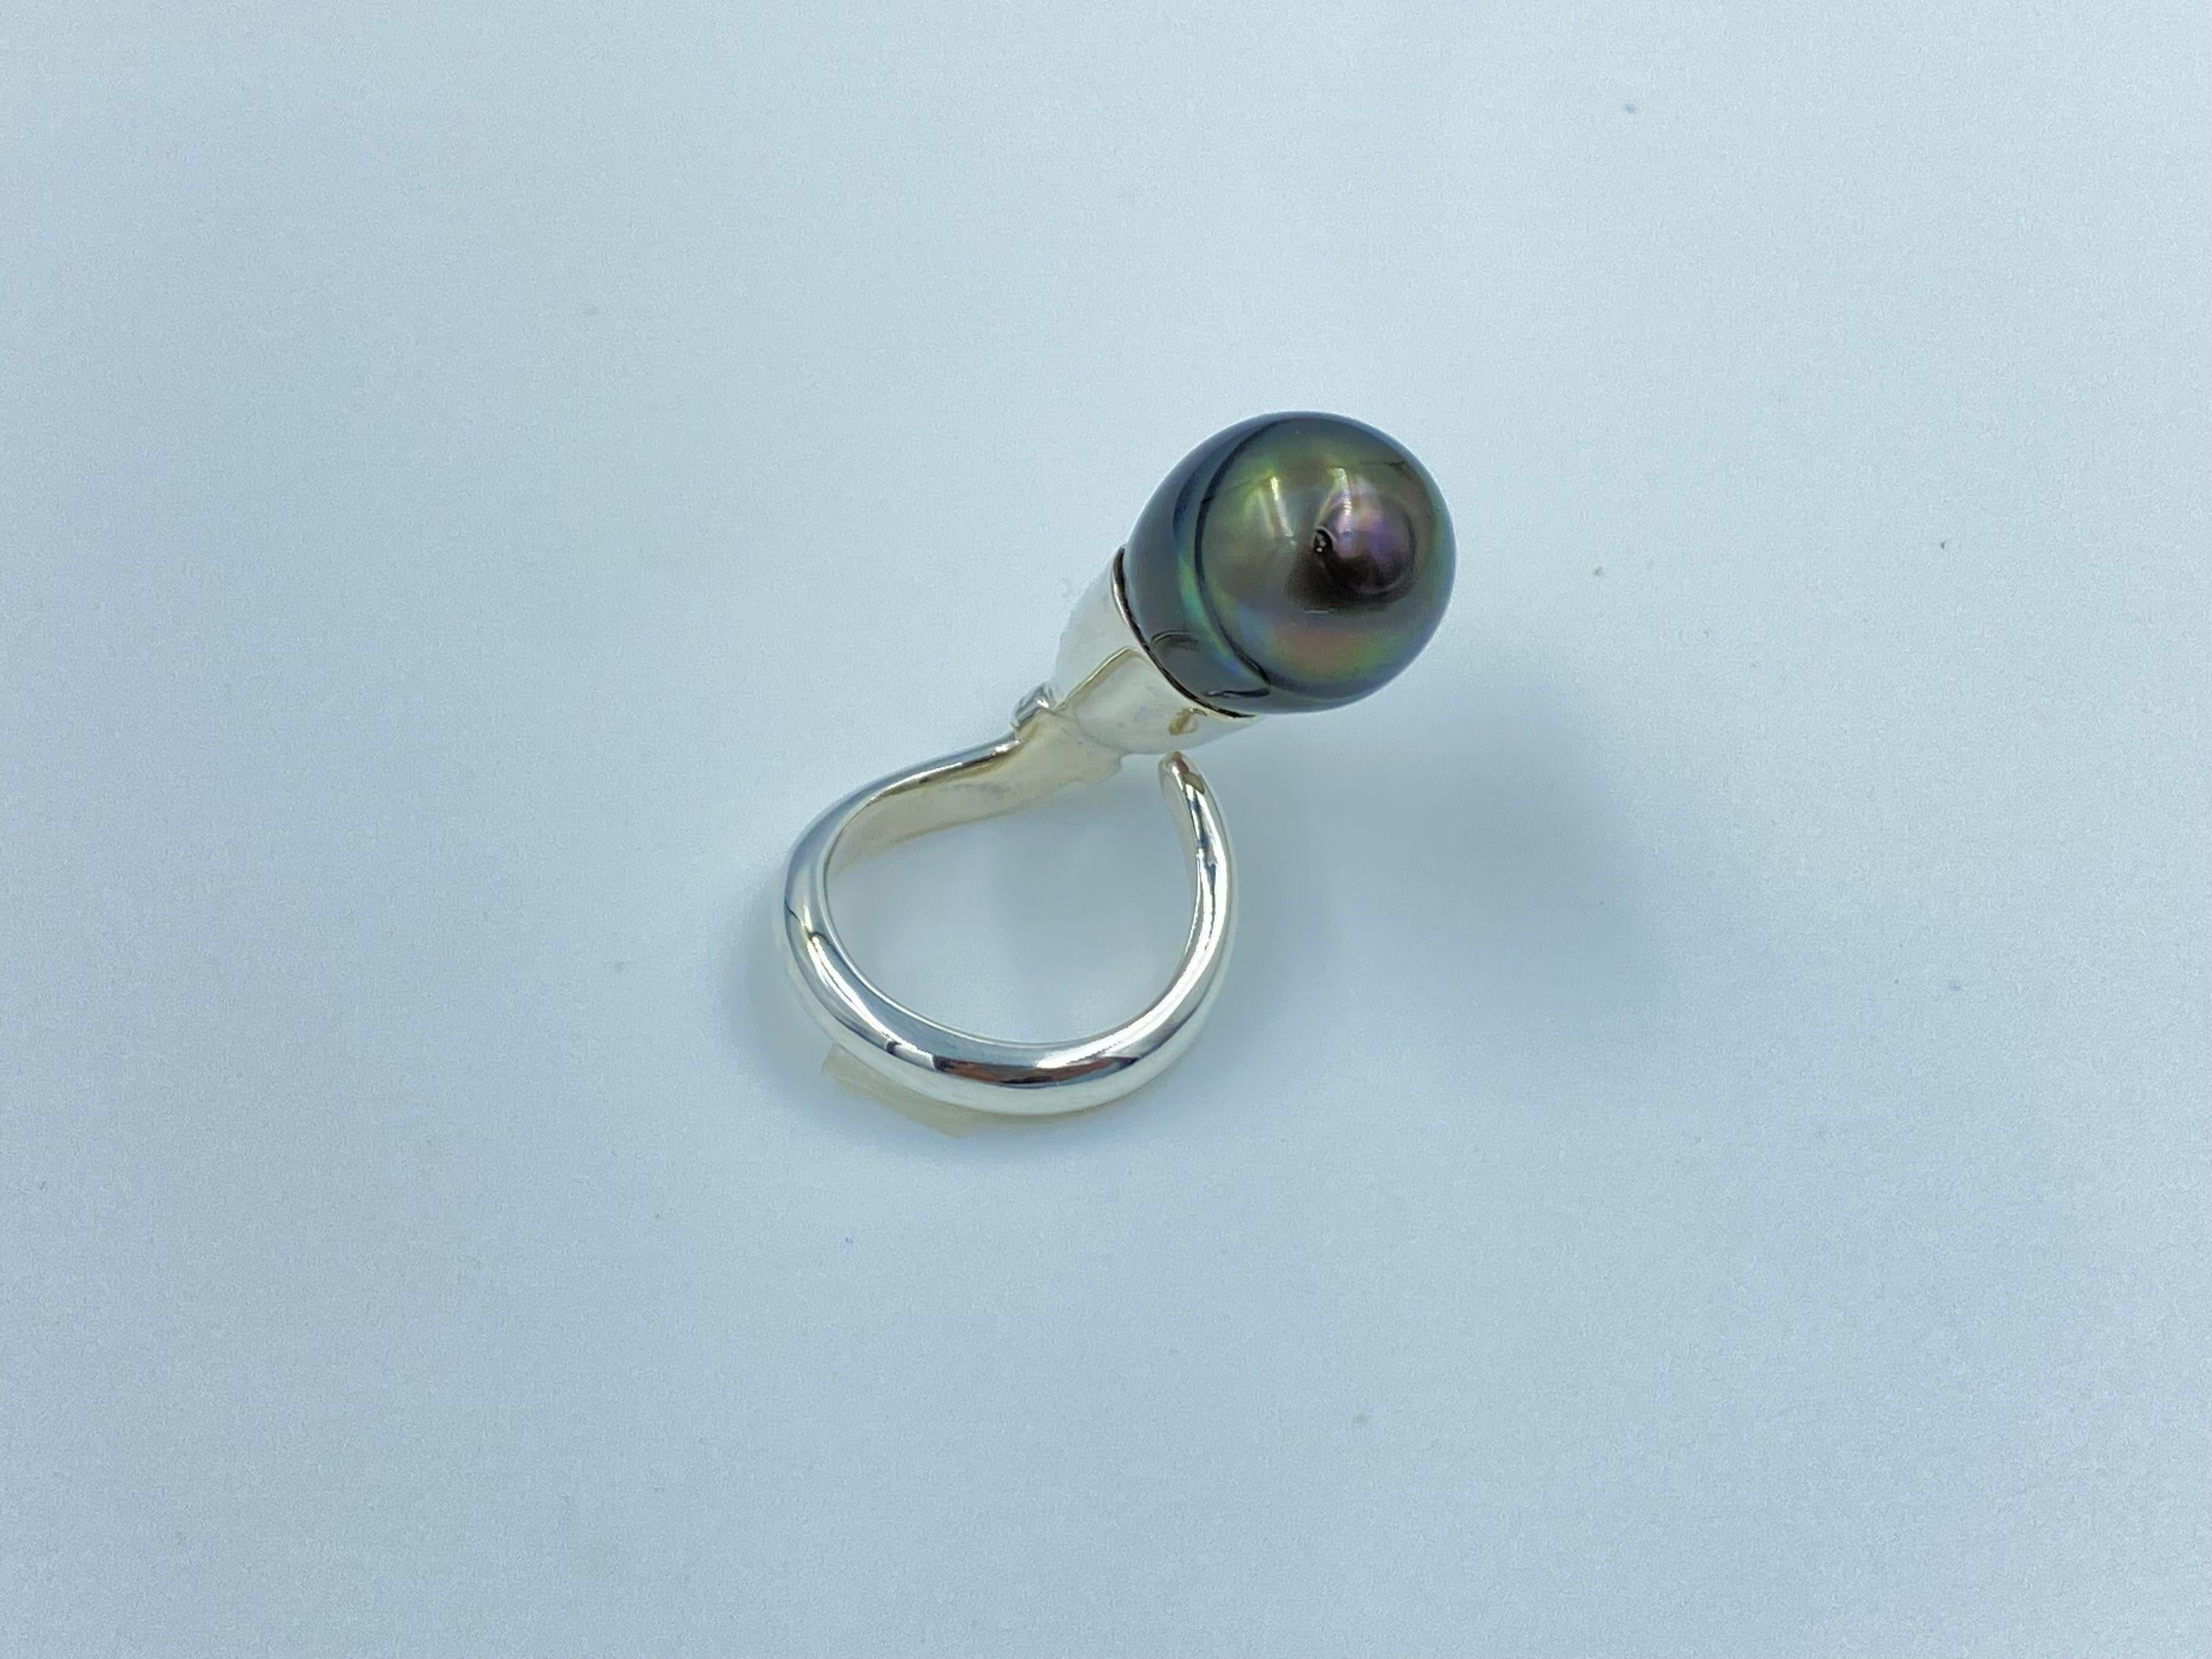 With an alluring baroque Tahitian pearl in a stunning shade of peacock black, this solitaire ring delivers luxury from every angle. Set on a sterling silver band that can be adjusted to suit any finger, embrace a unique take on the classic pearl